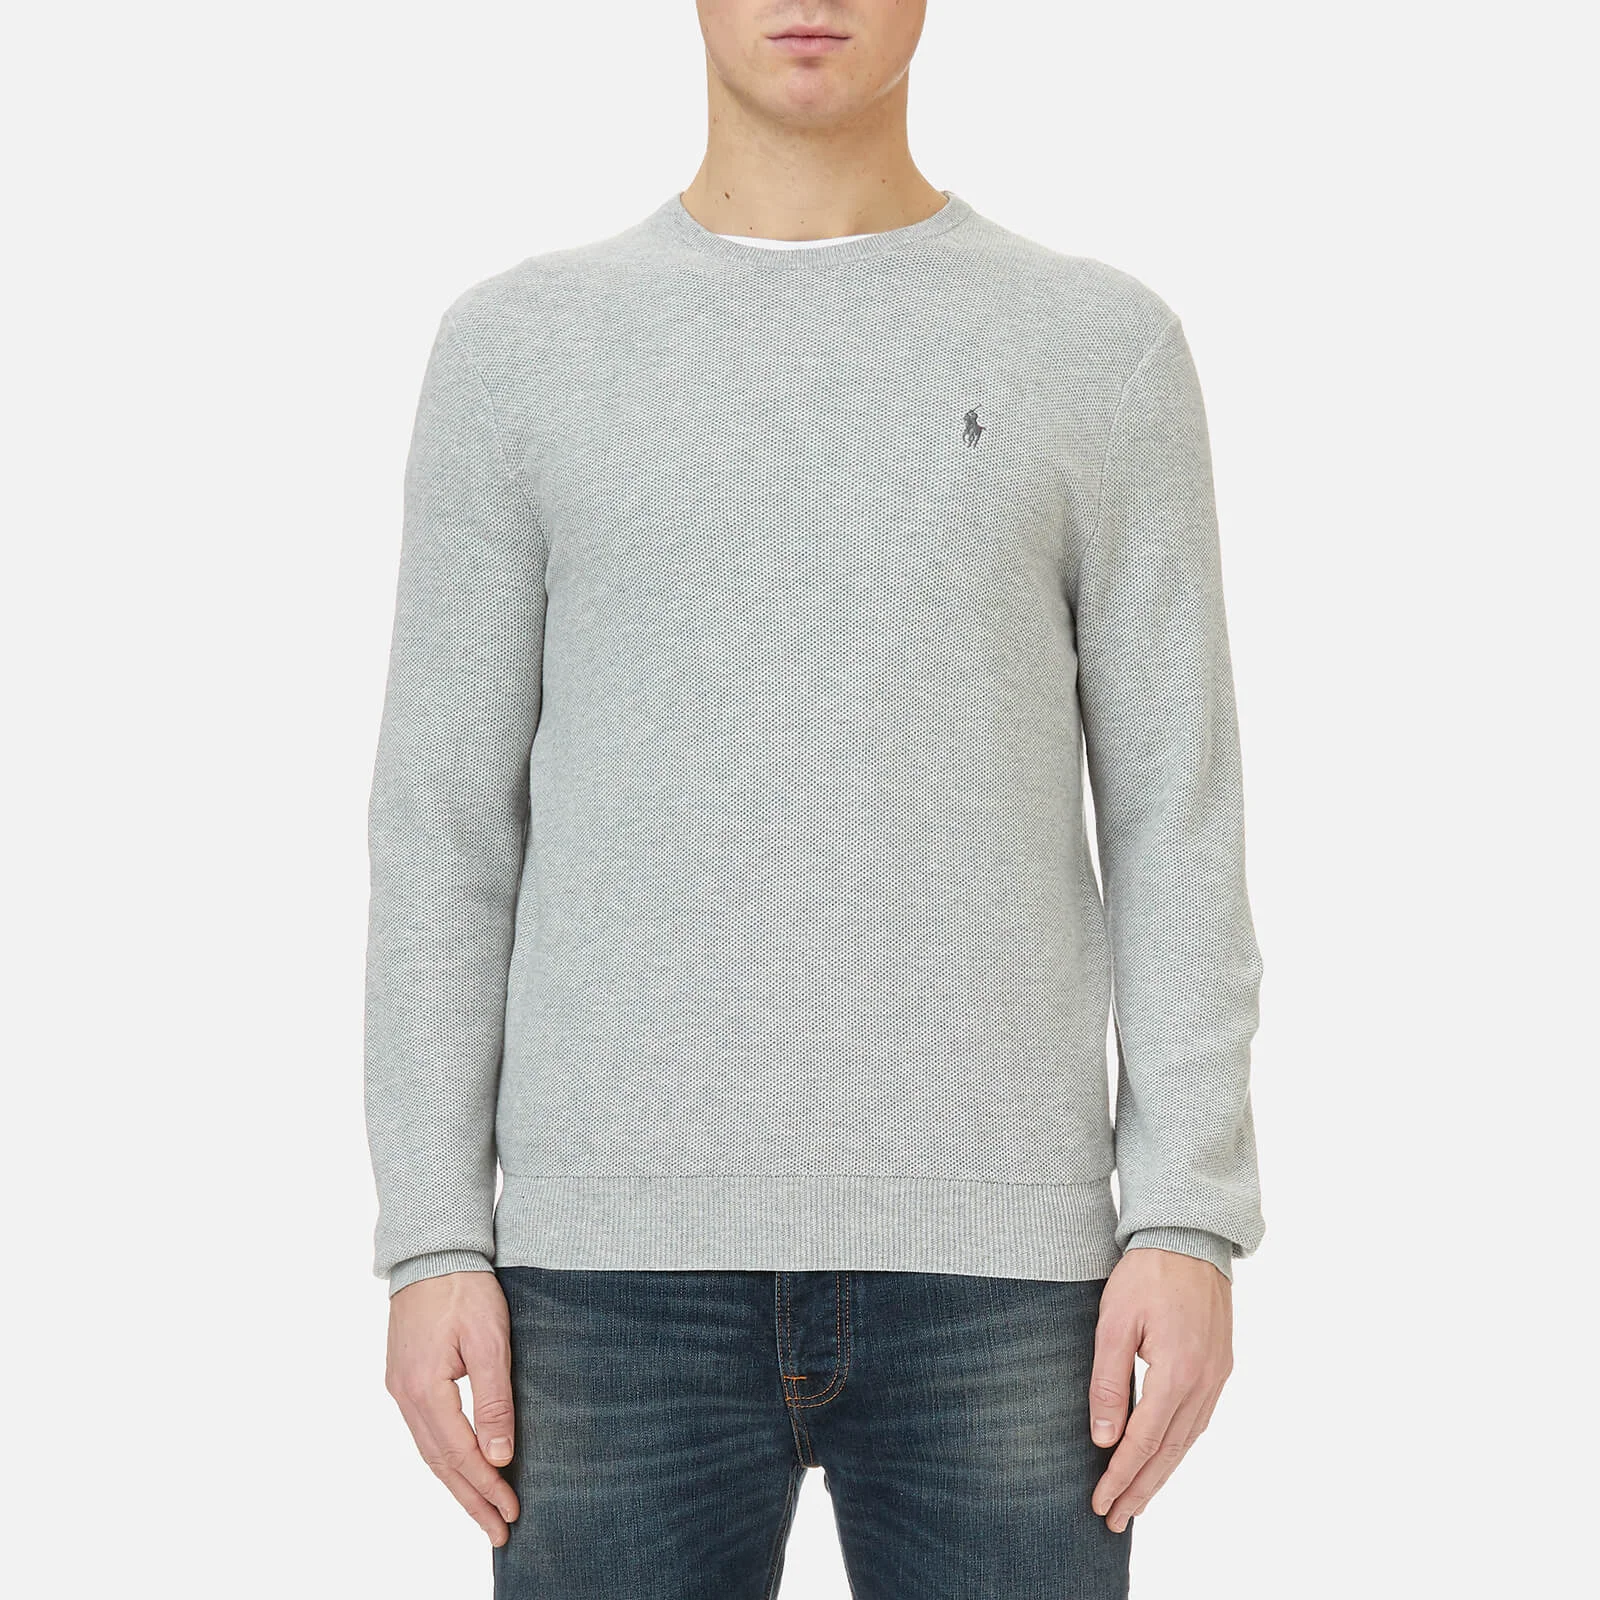 Polo Ralph Lauren Men's Texturized Cotton Crew Knitted Jumper - Grey Image 1